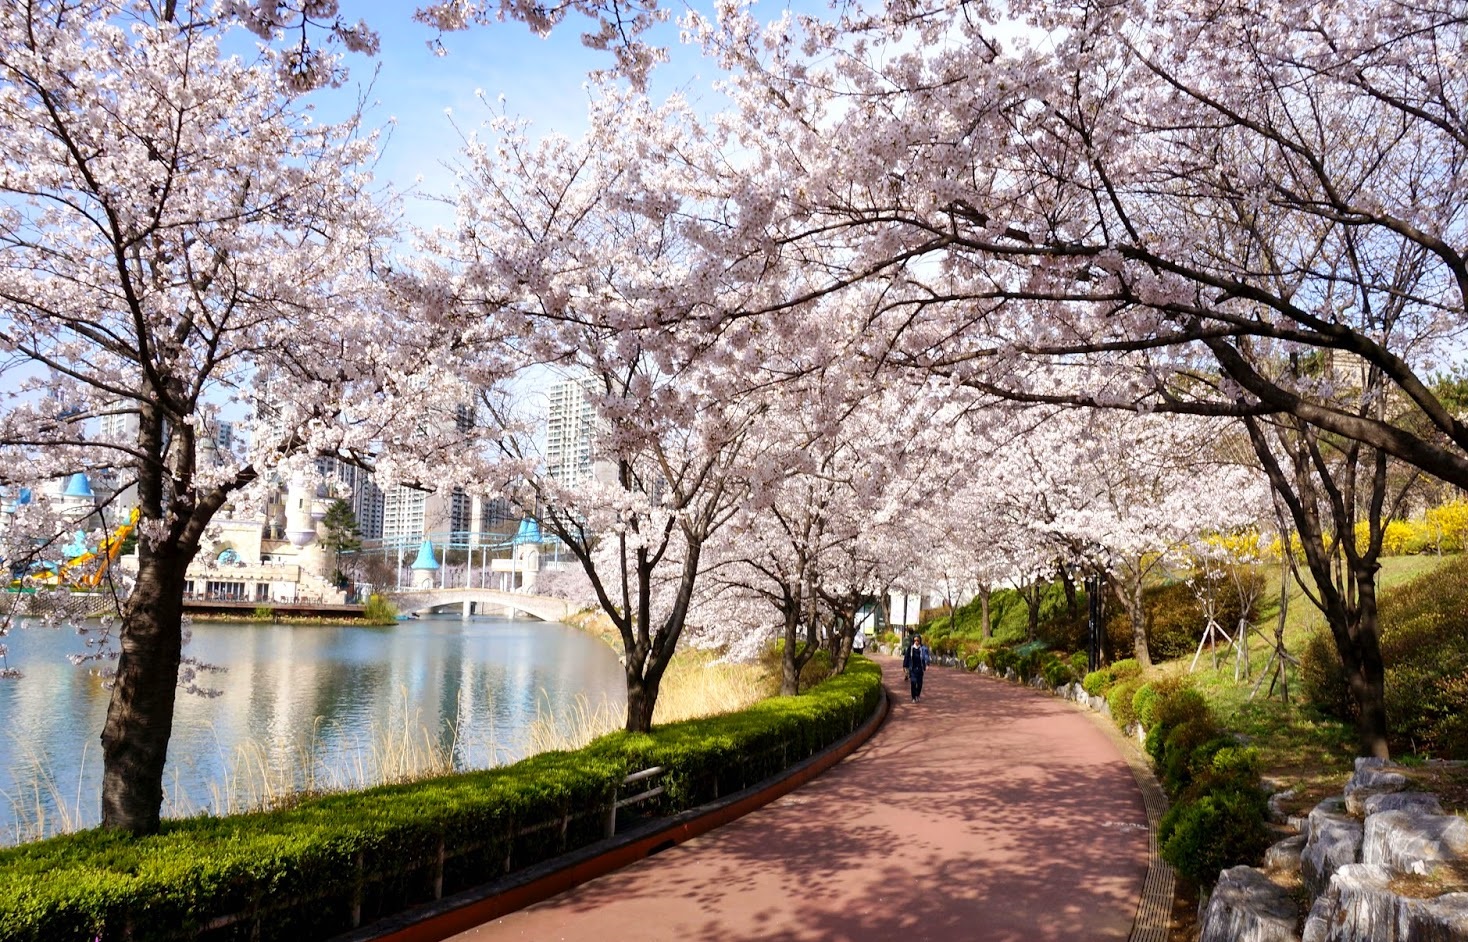 Experience Asia 5 best places to admire cherry blossoms in South Korea